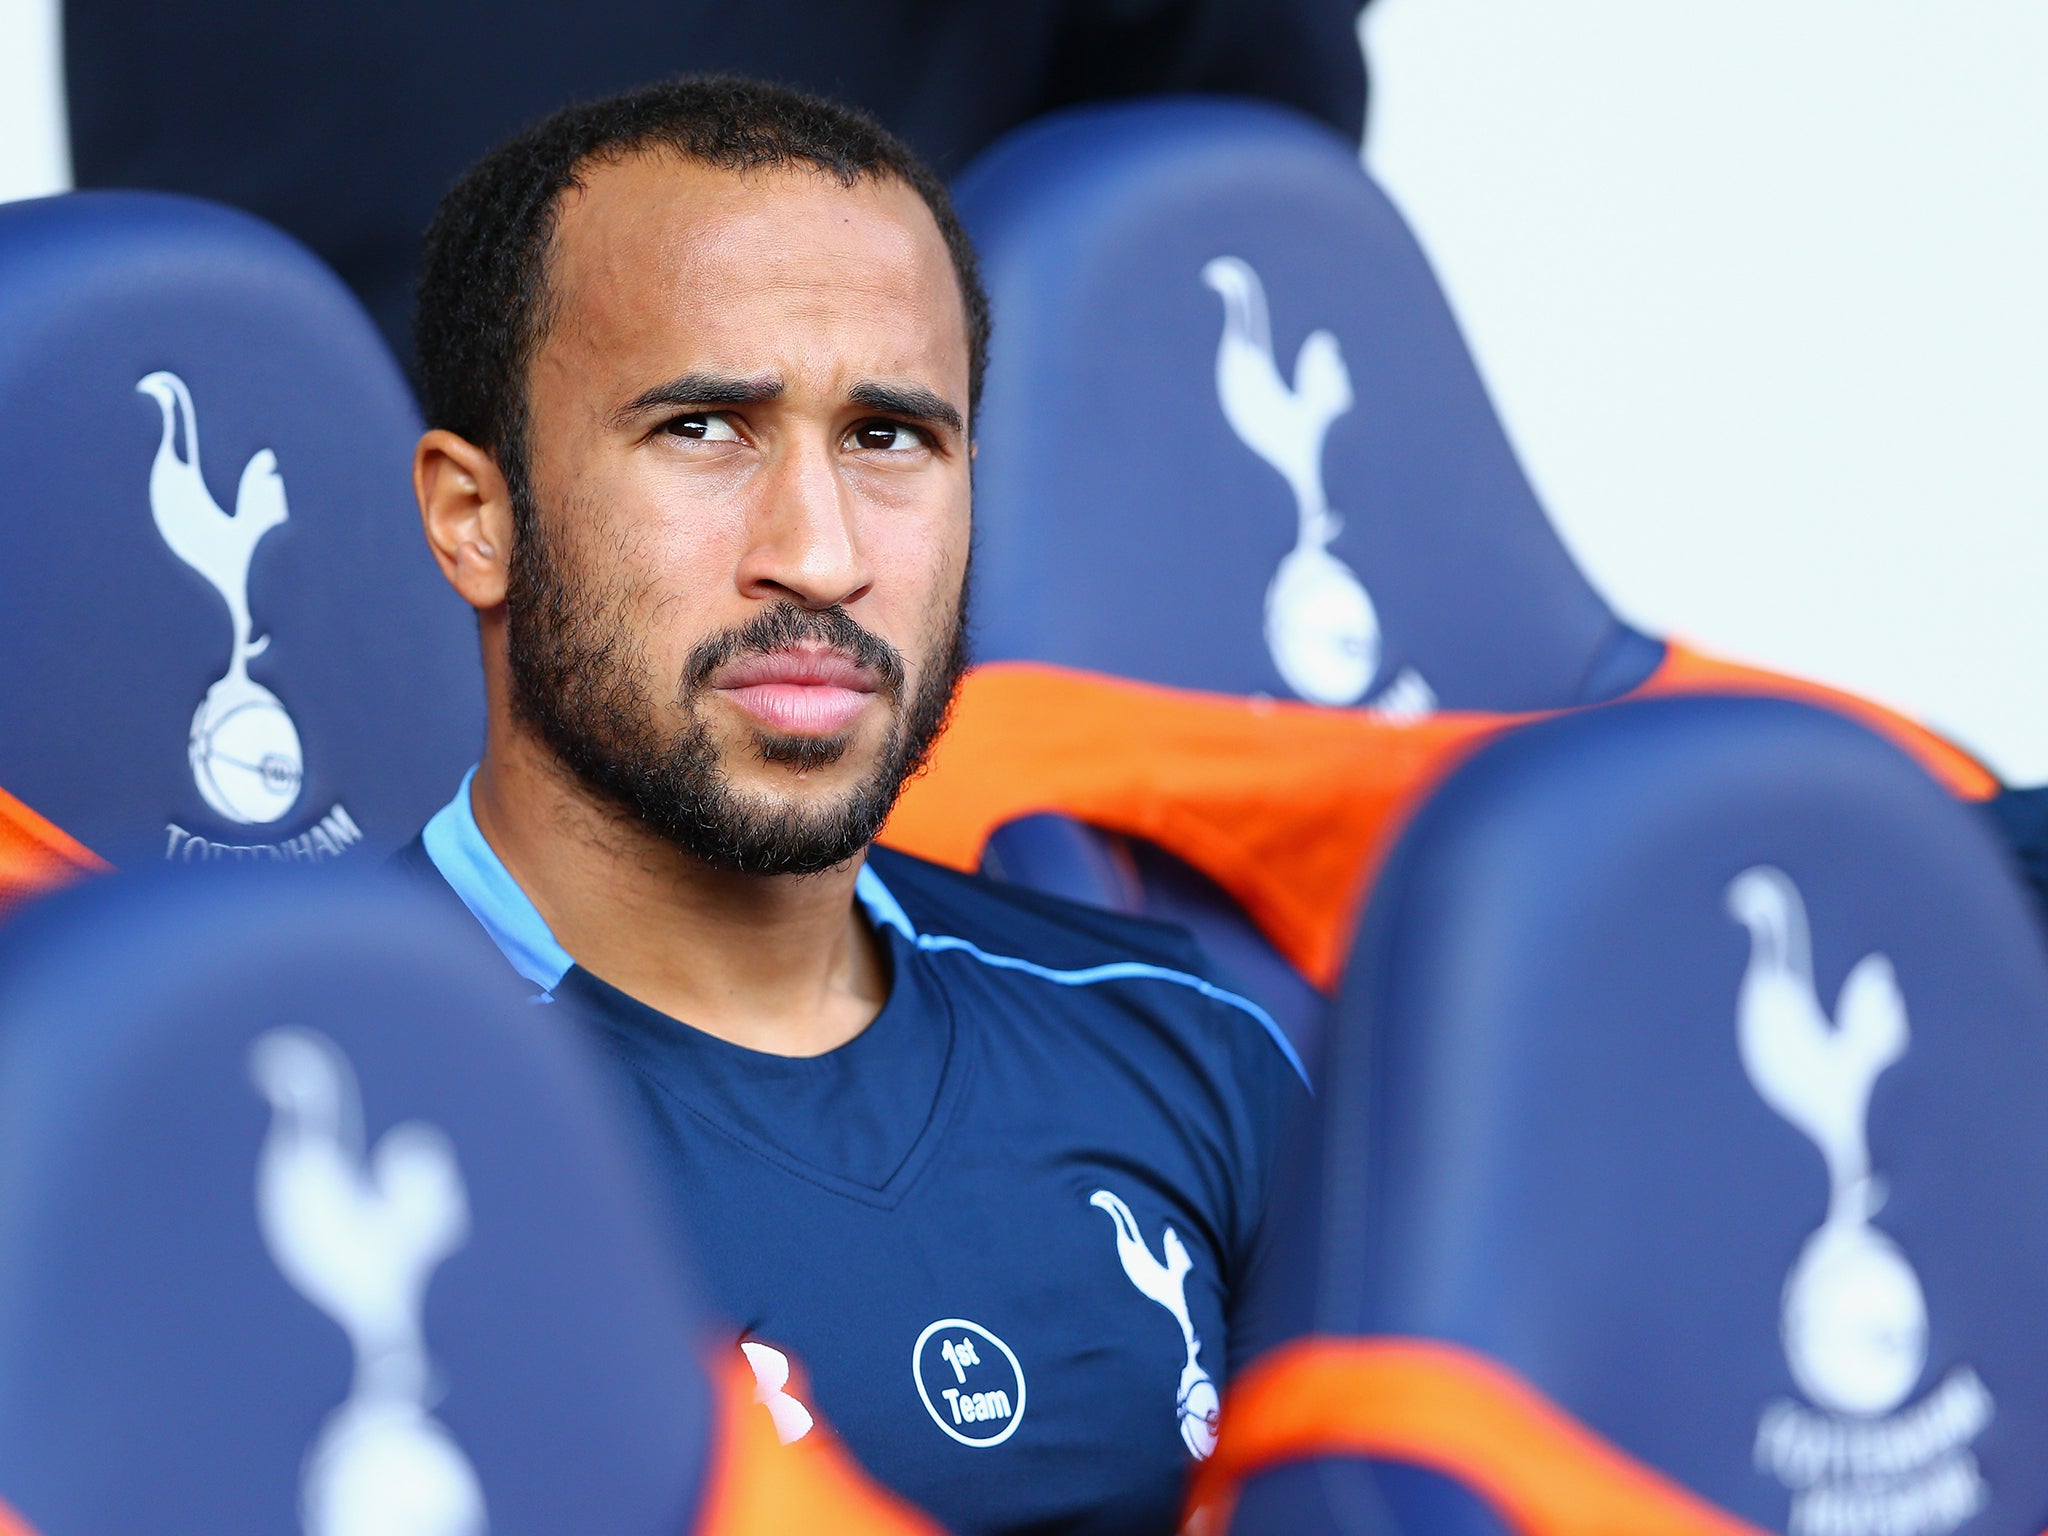 Andros Townsend finds himself an outcast at Tottenham Hotspur this season